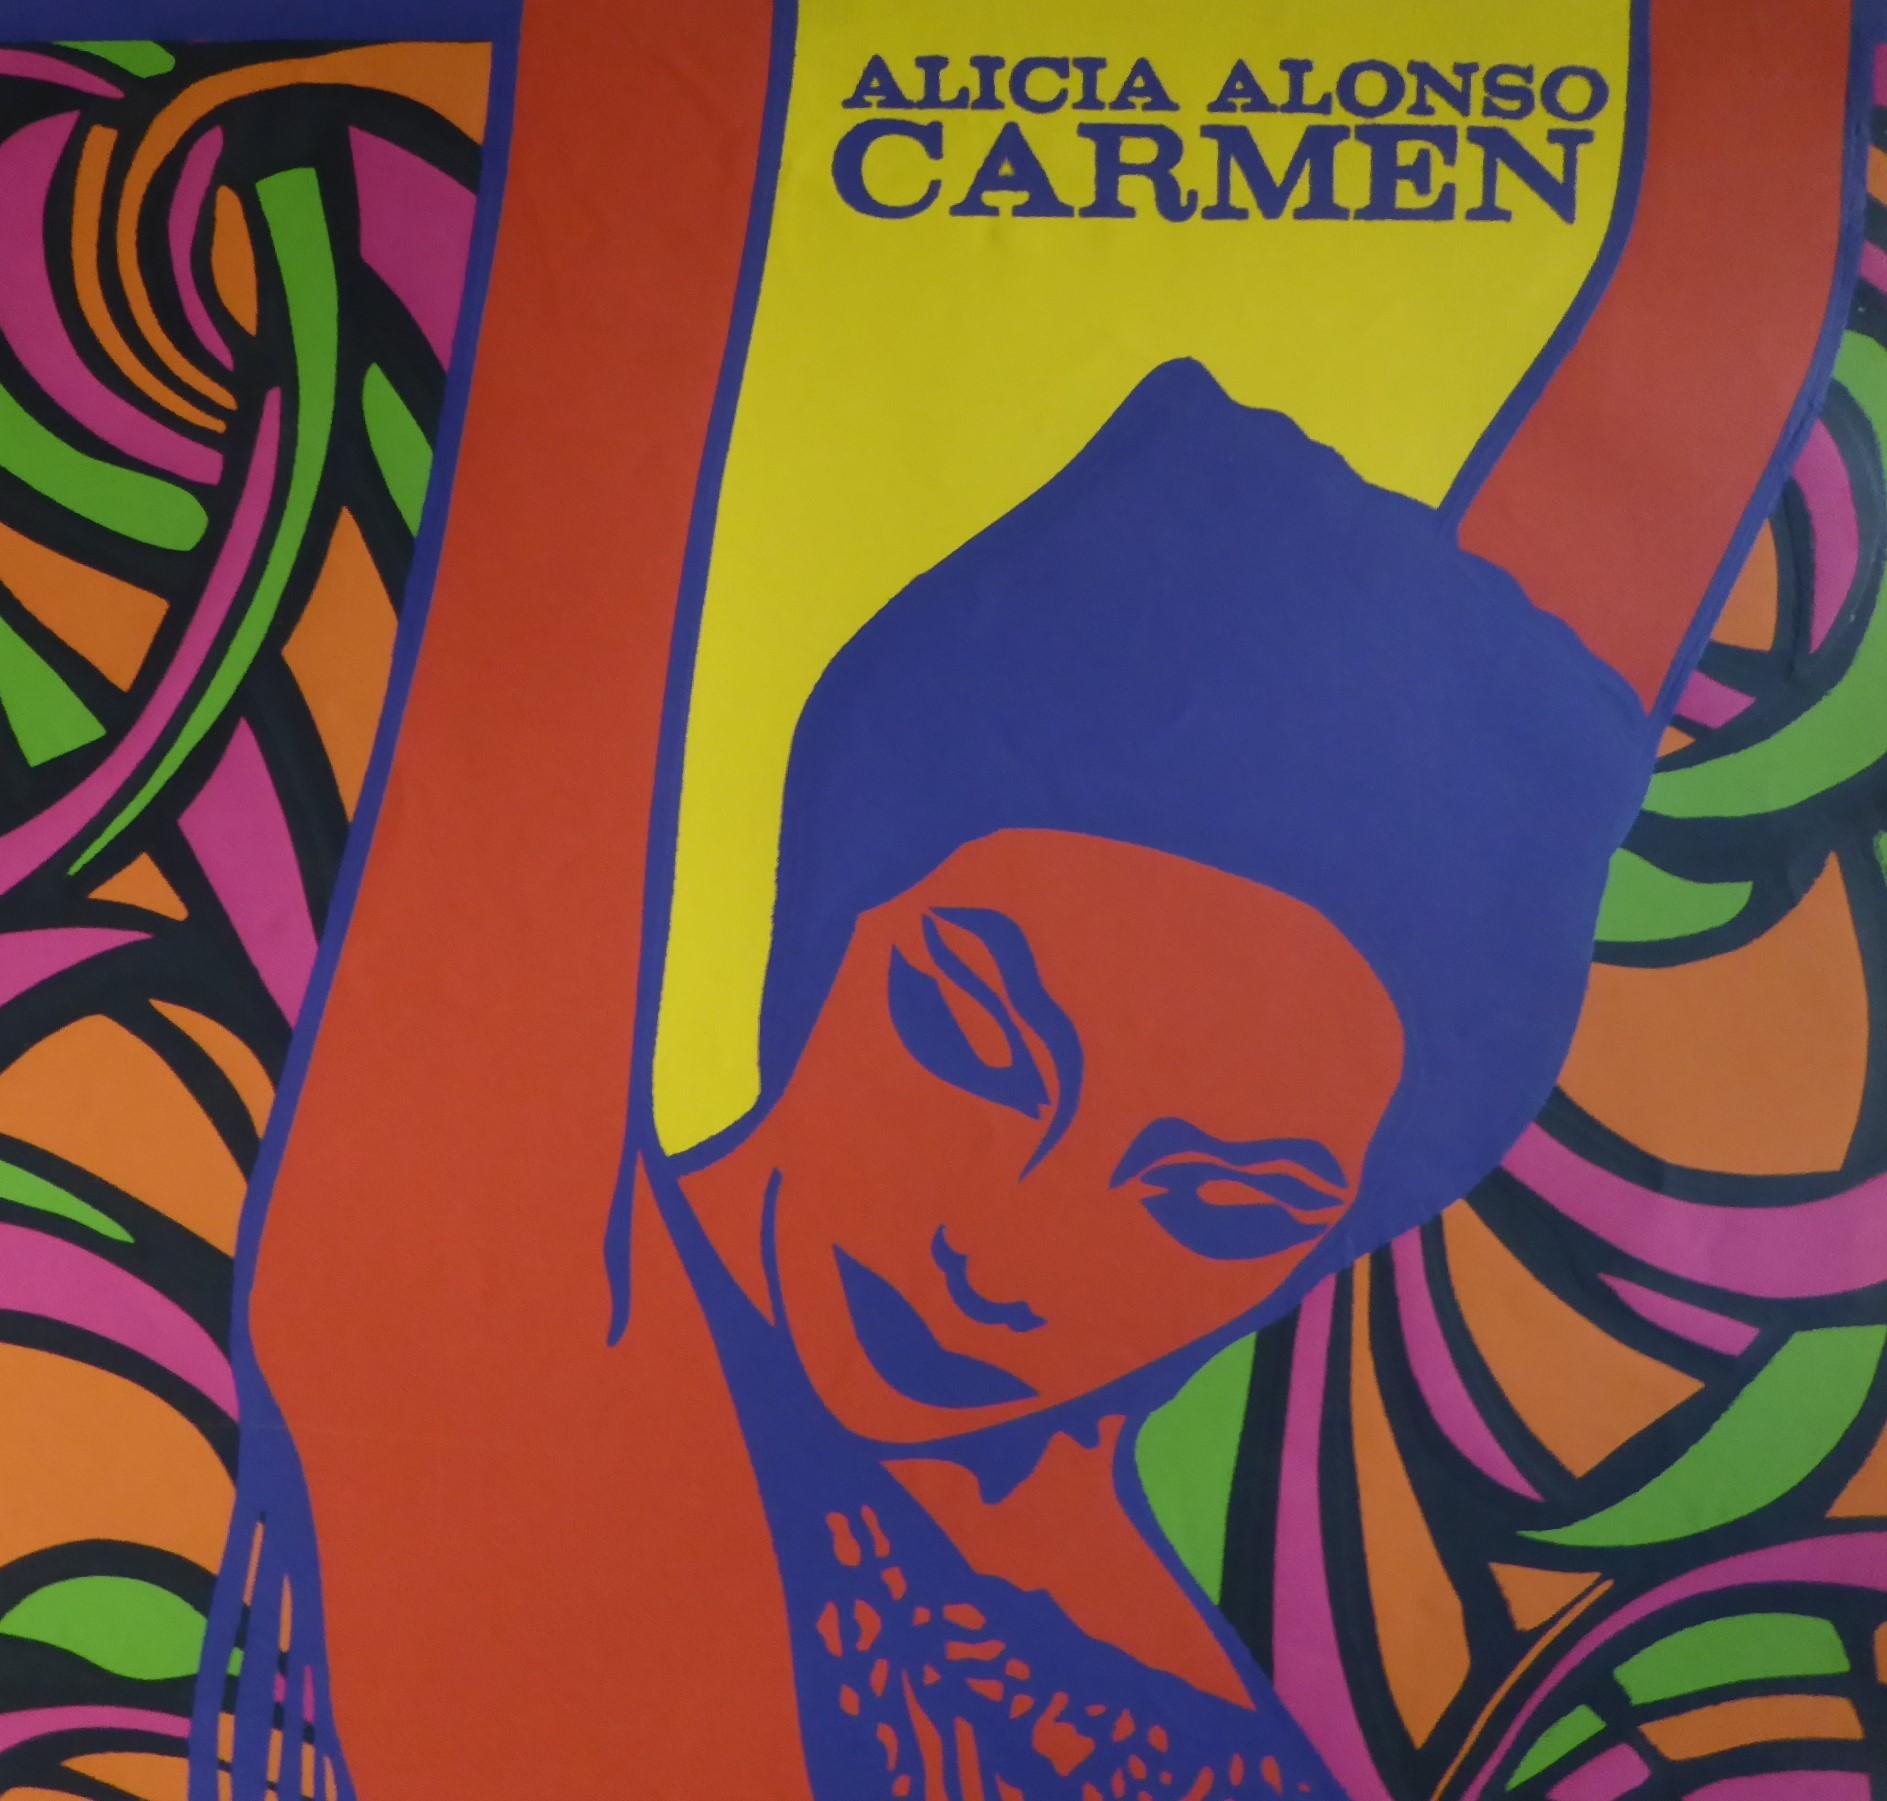 Pop Op art ballet silkscreen Cuban vintage poster of adaptation by “ALICIA ALONSO – CARMEN”  by Antonio Fernández Reboiro 1970 for the ICAIC.
Lower right engraved reboiro/70 and signed in ink roboiro
Condition:  Very Good. Bottom shows some minor